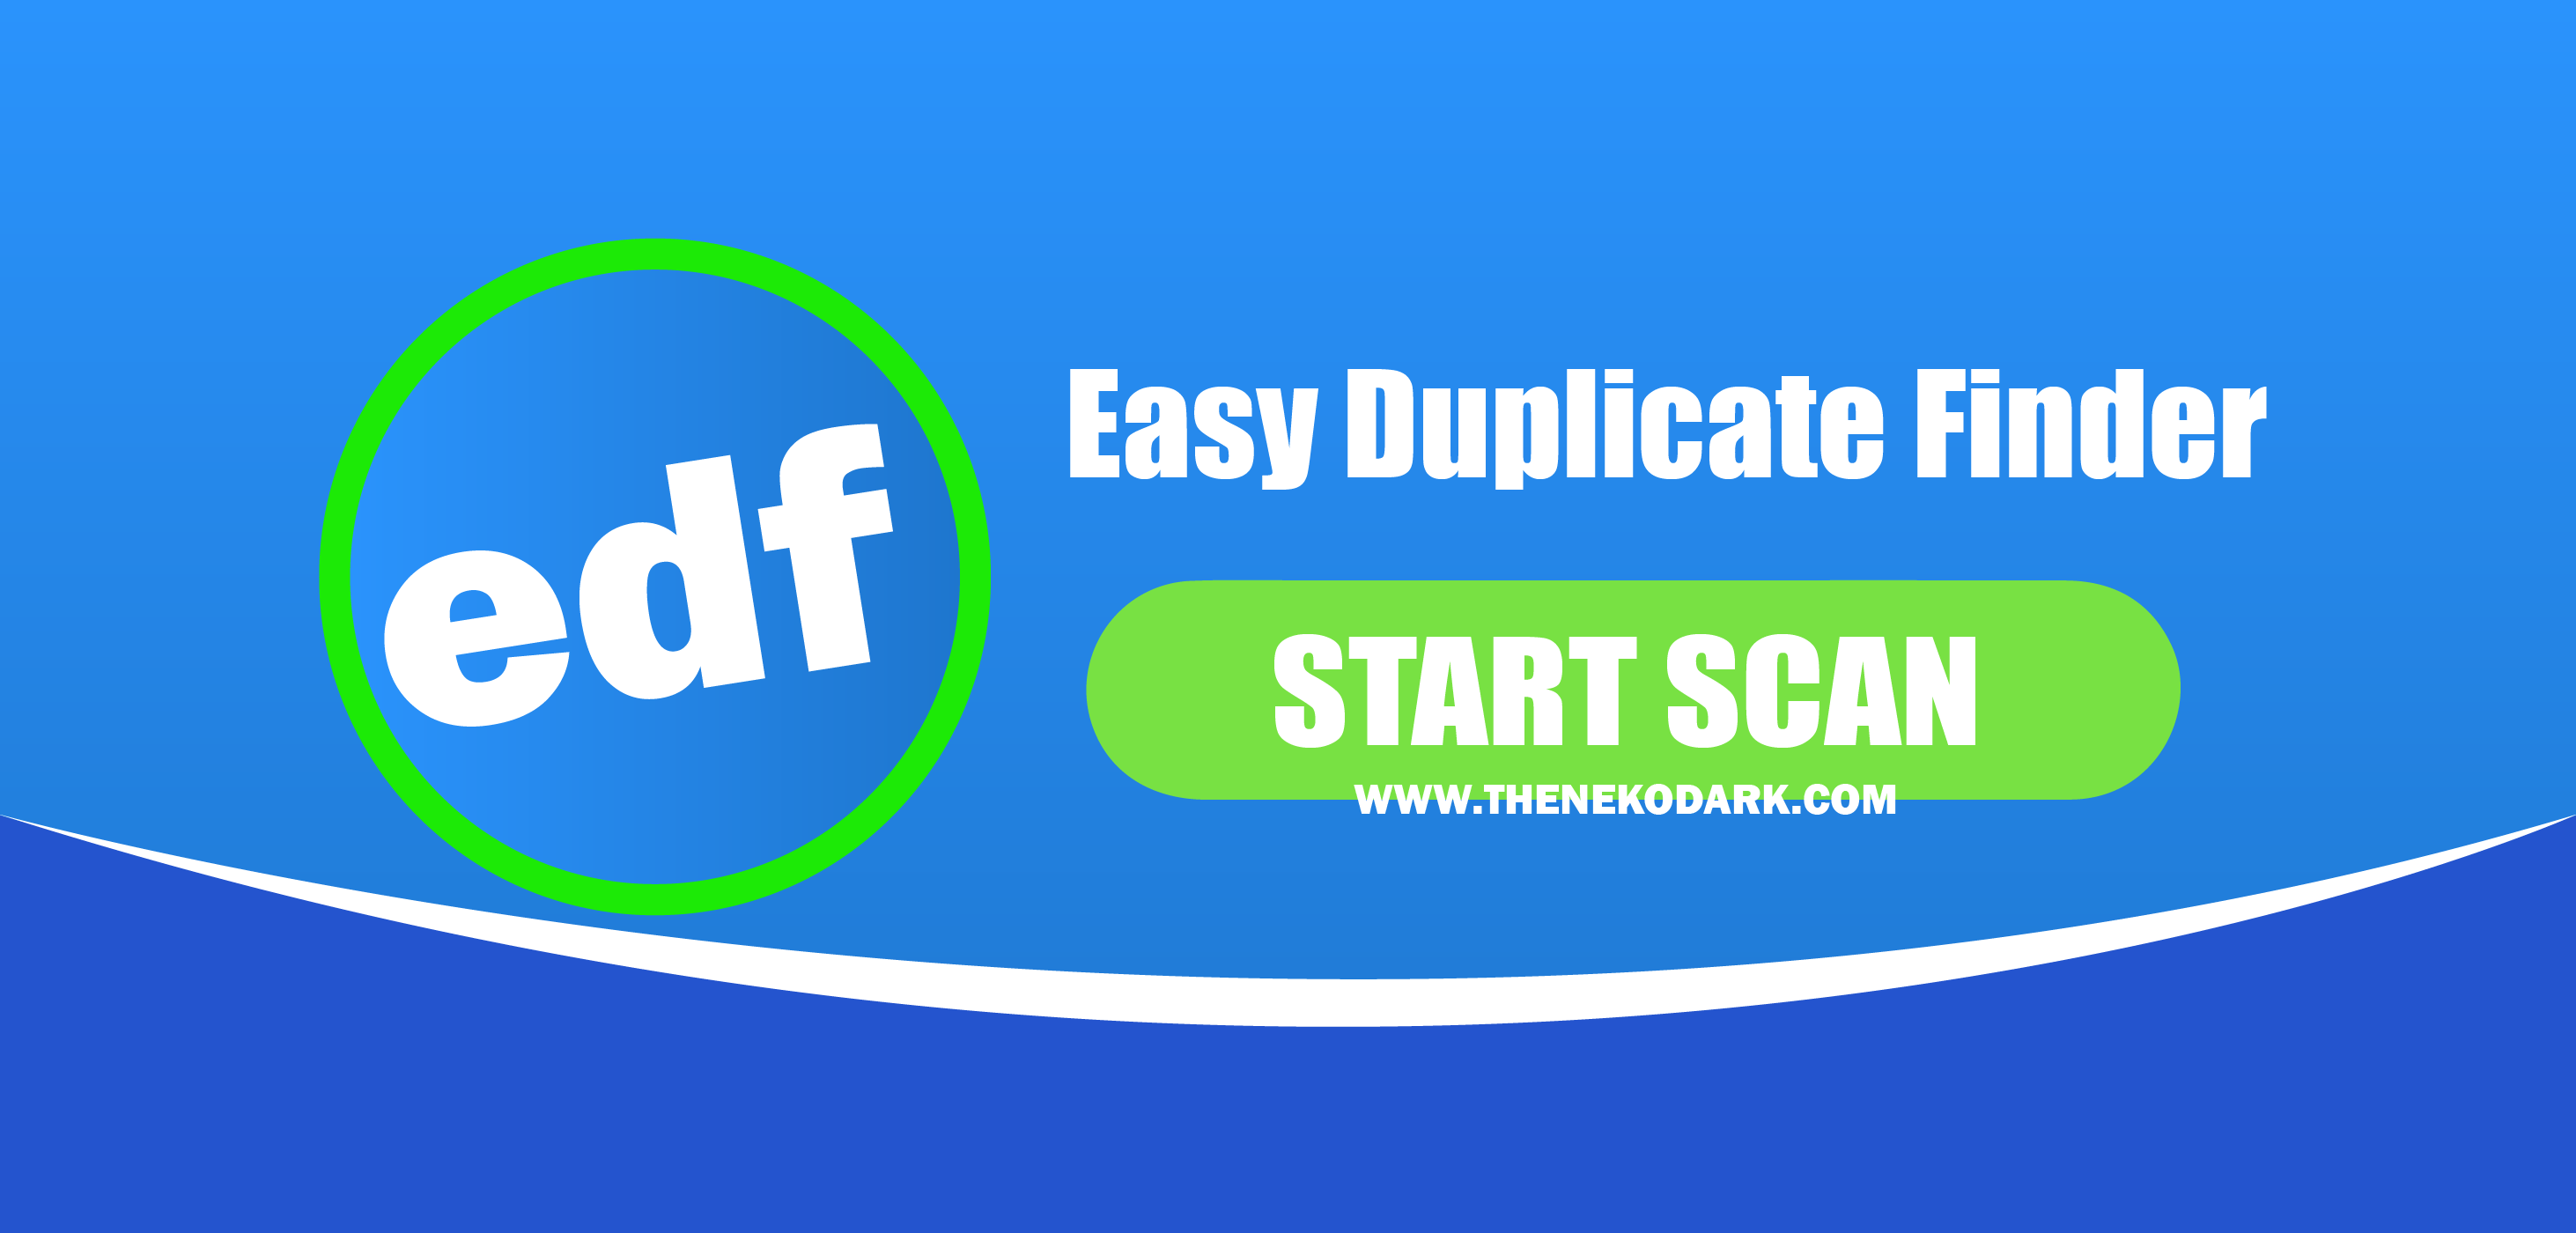 easy duplicate finder coupon